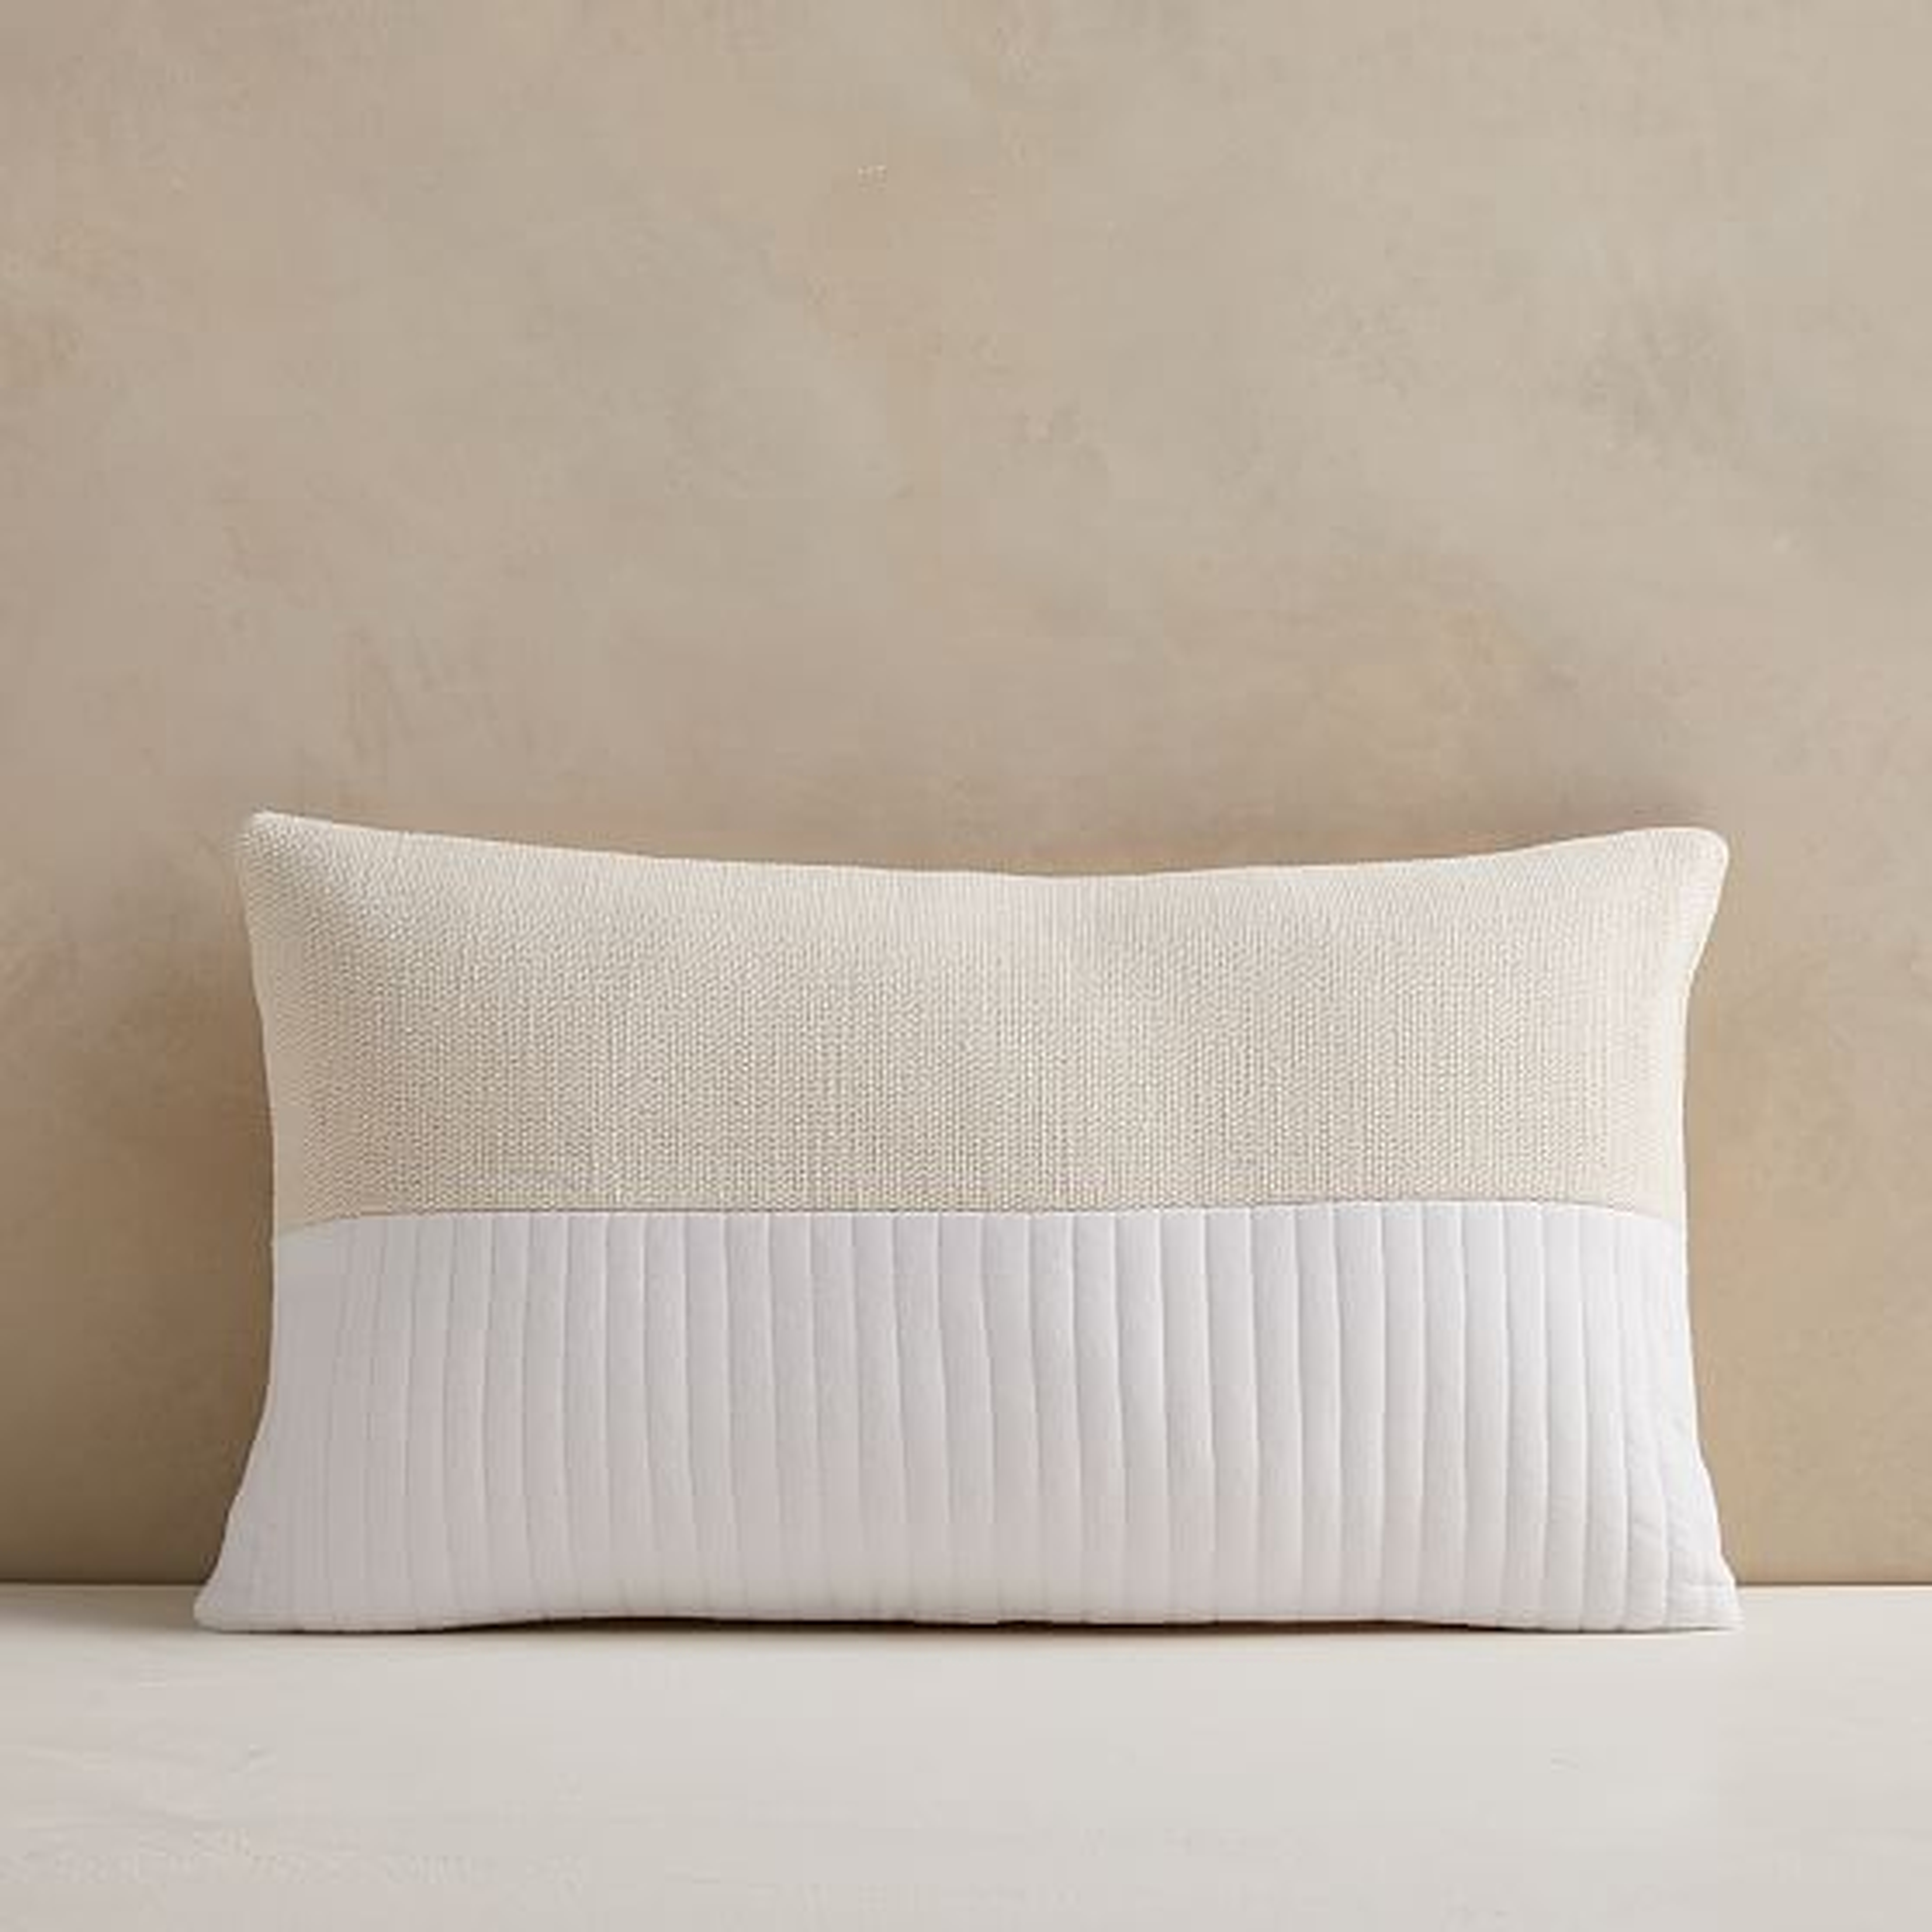 Quilted Cotton Pillow Cover, 12"x21", White - West Elm